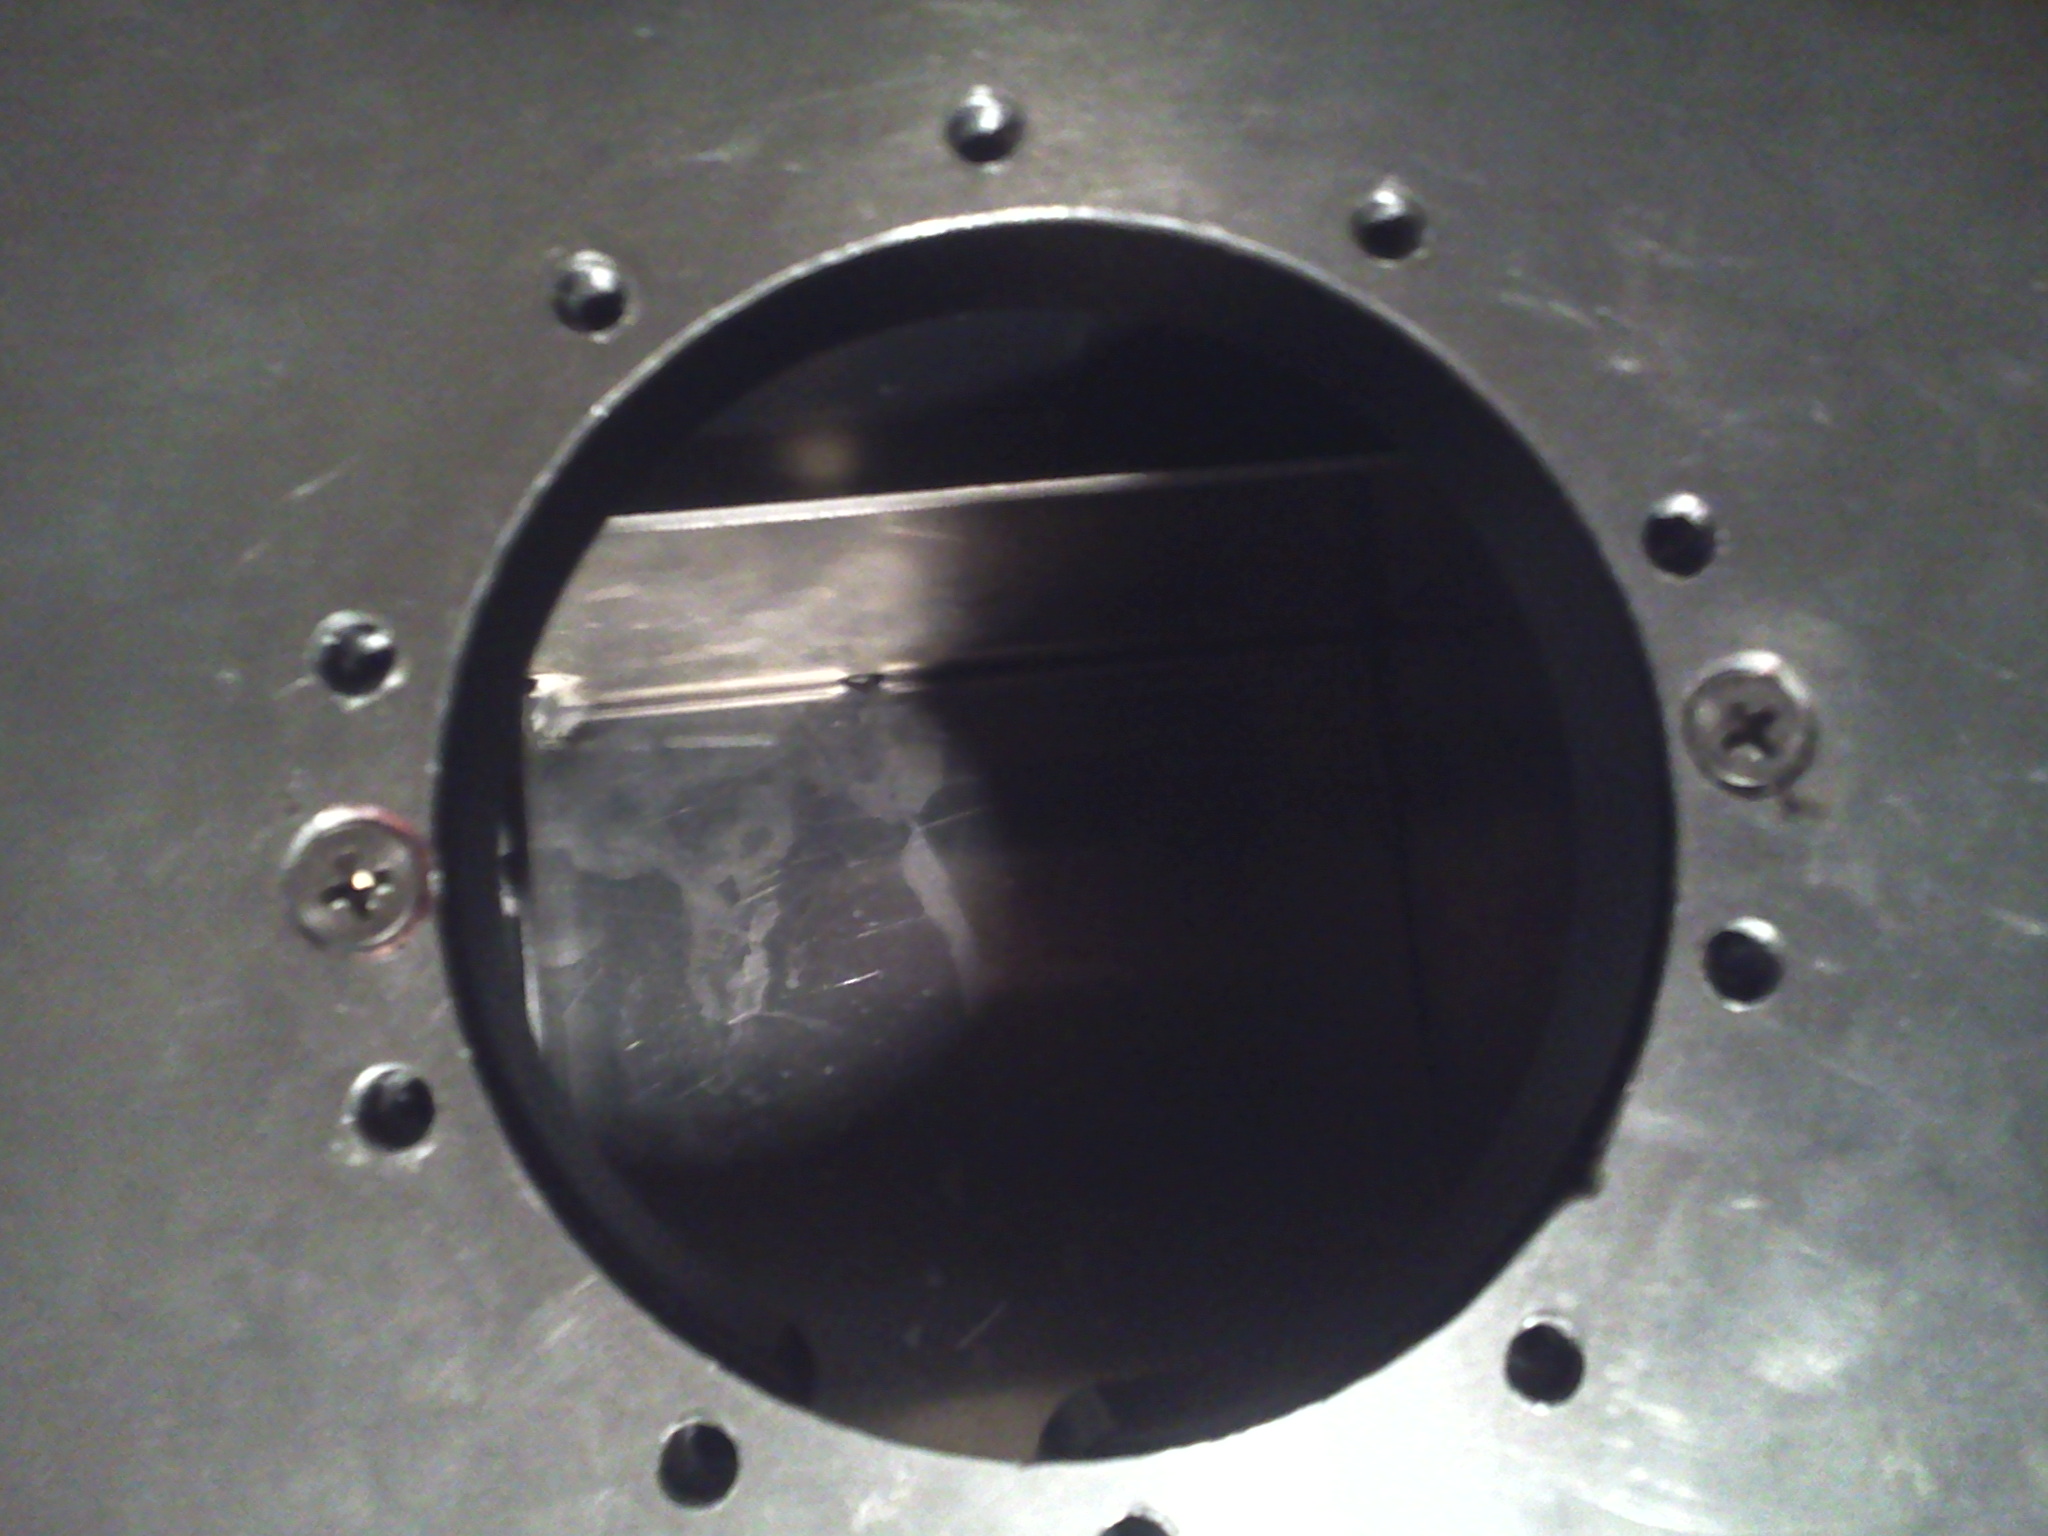 This picture shows the defective c-shaped threaded backing piece that holds the fuel pump to the fuel cell